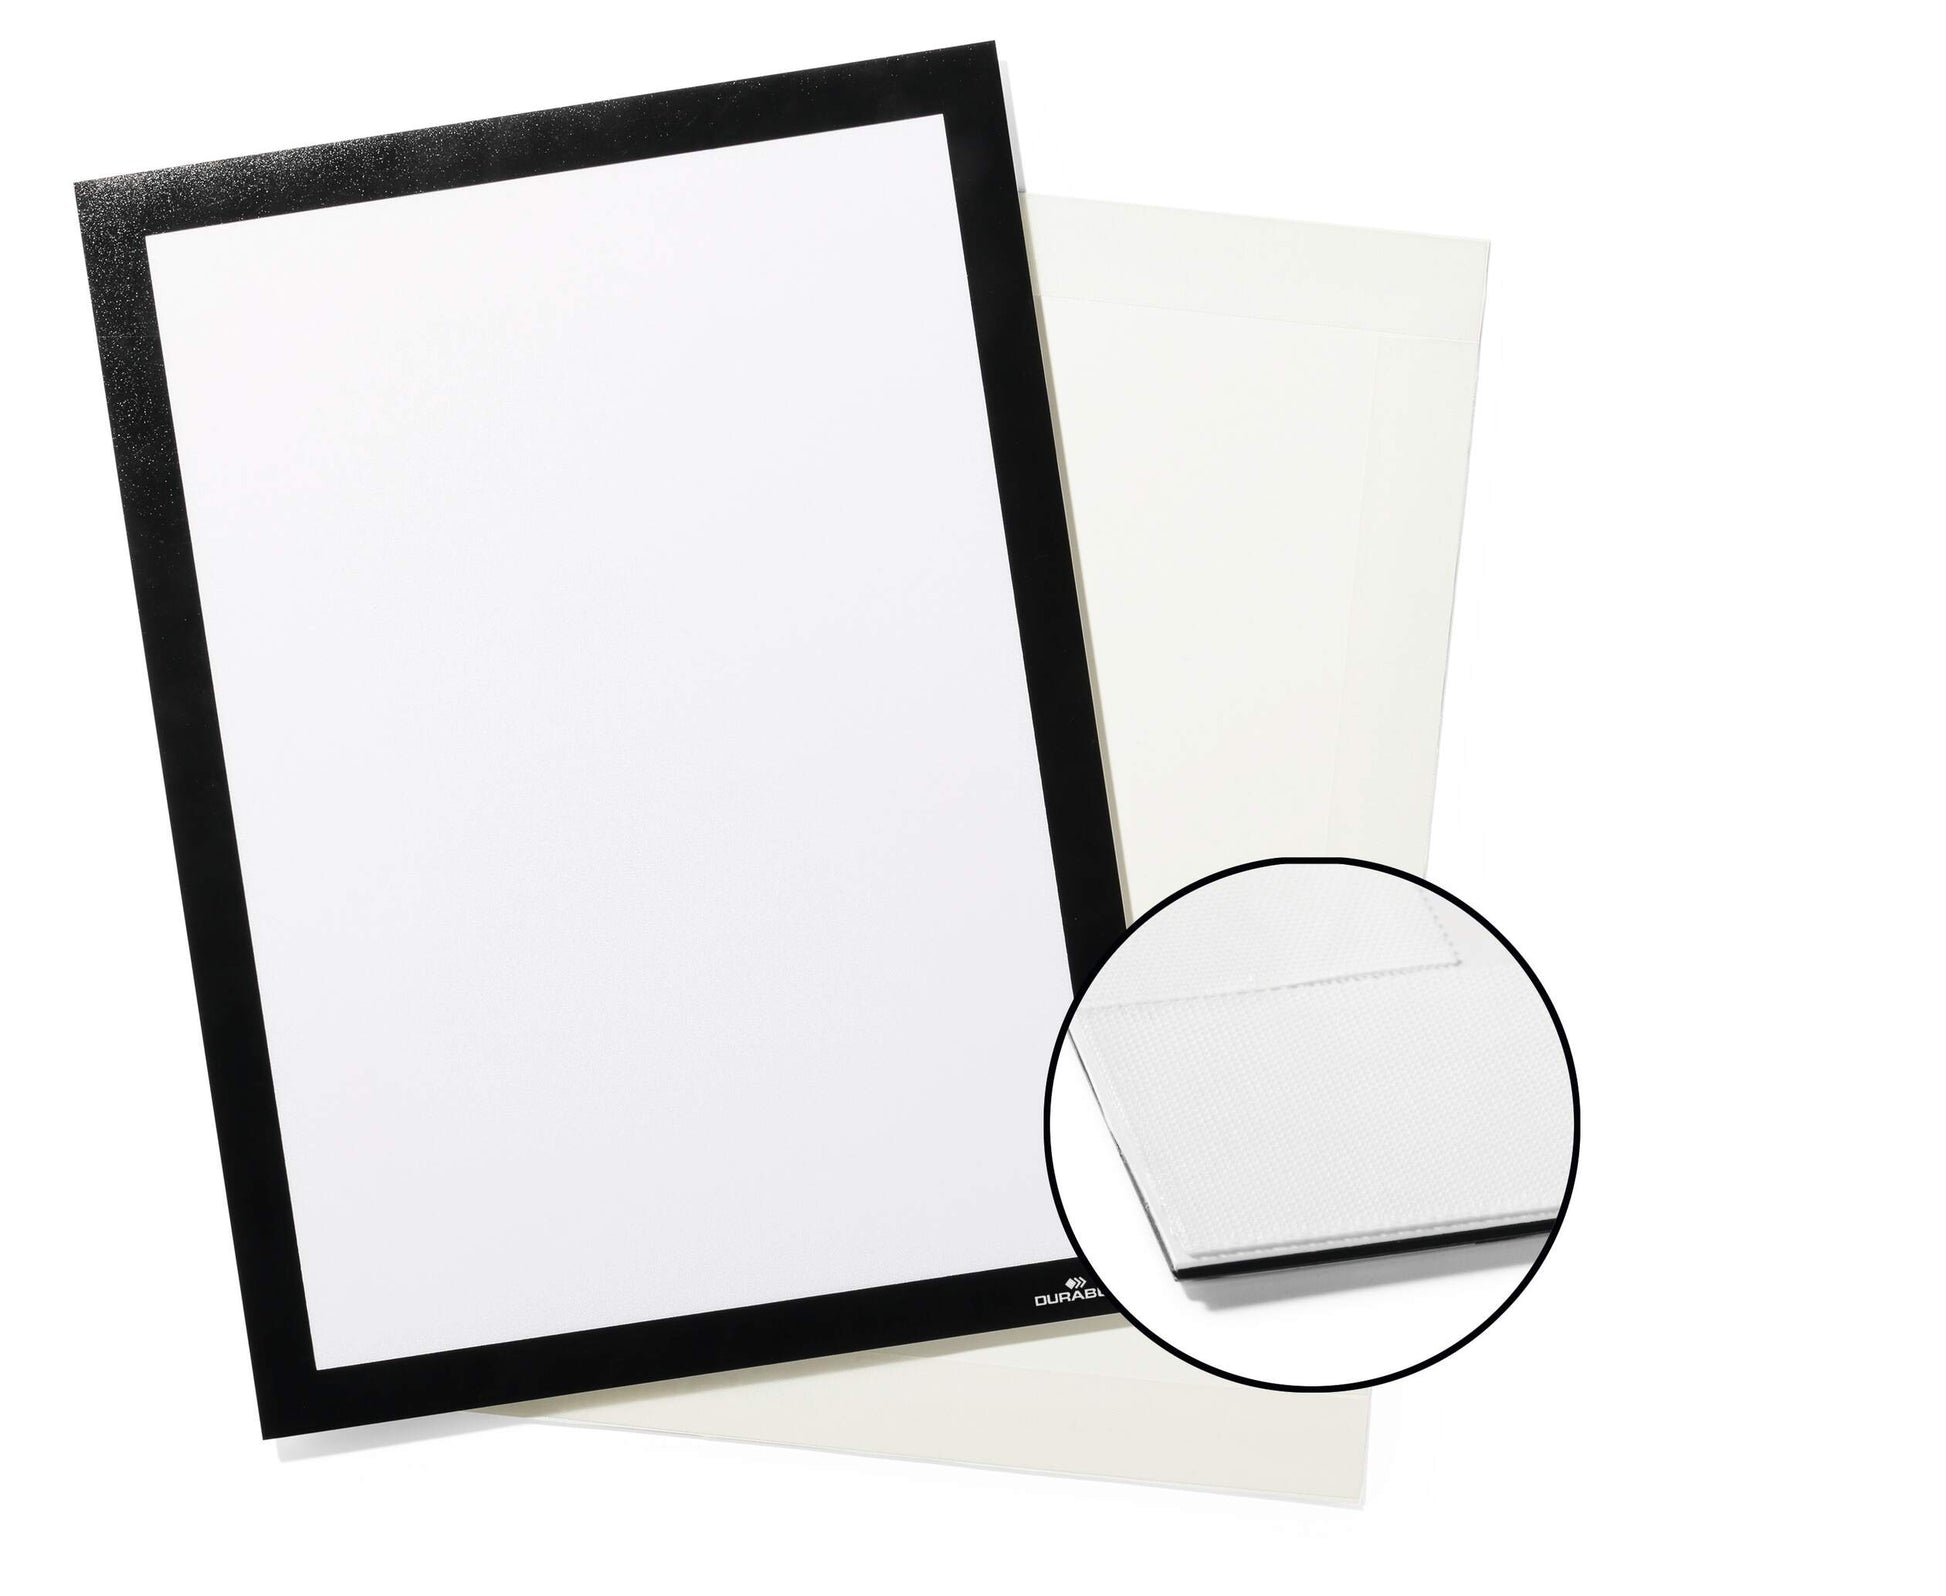 Durable DURAFRAME GRIP Fabric Adhesive Magnetic Signage Frame | A4 | Black